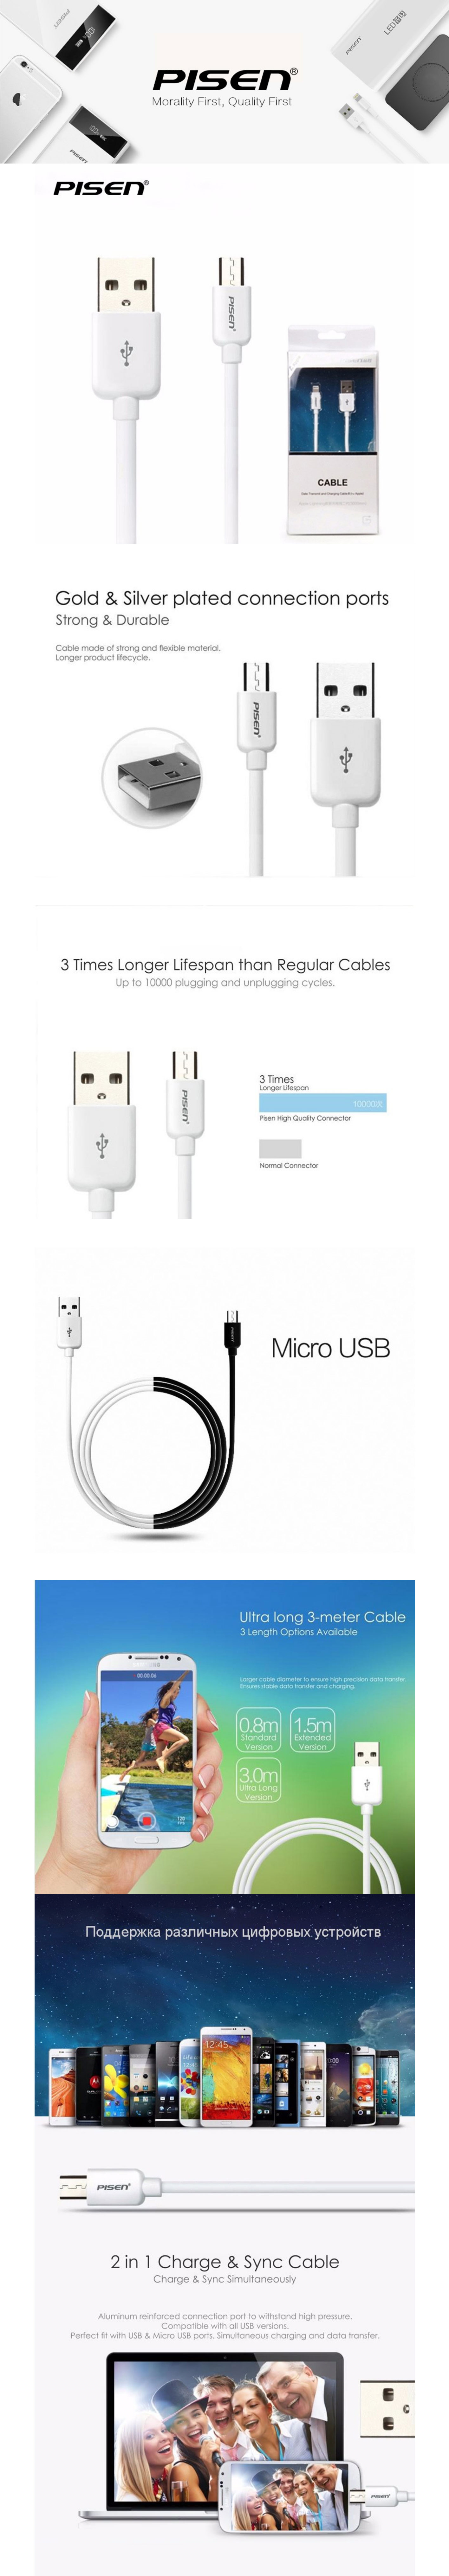 Pisen Micro USB 3.0 Data Transmit and Charging Cable - 800MM MU03-800 Details